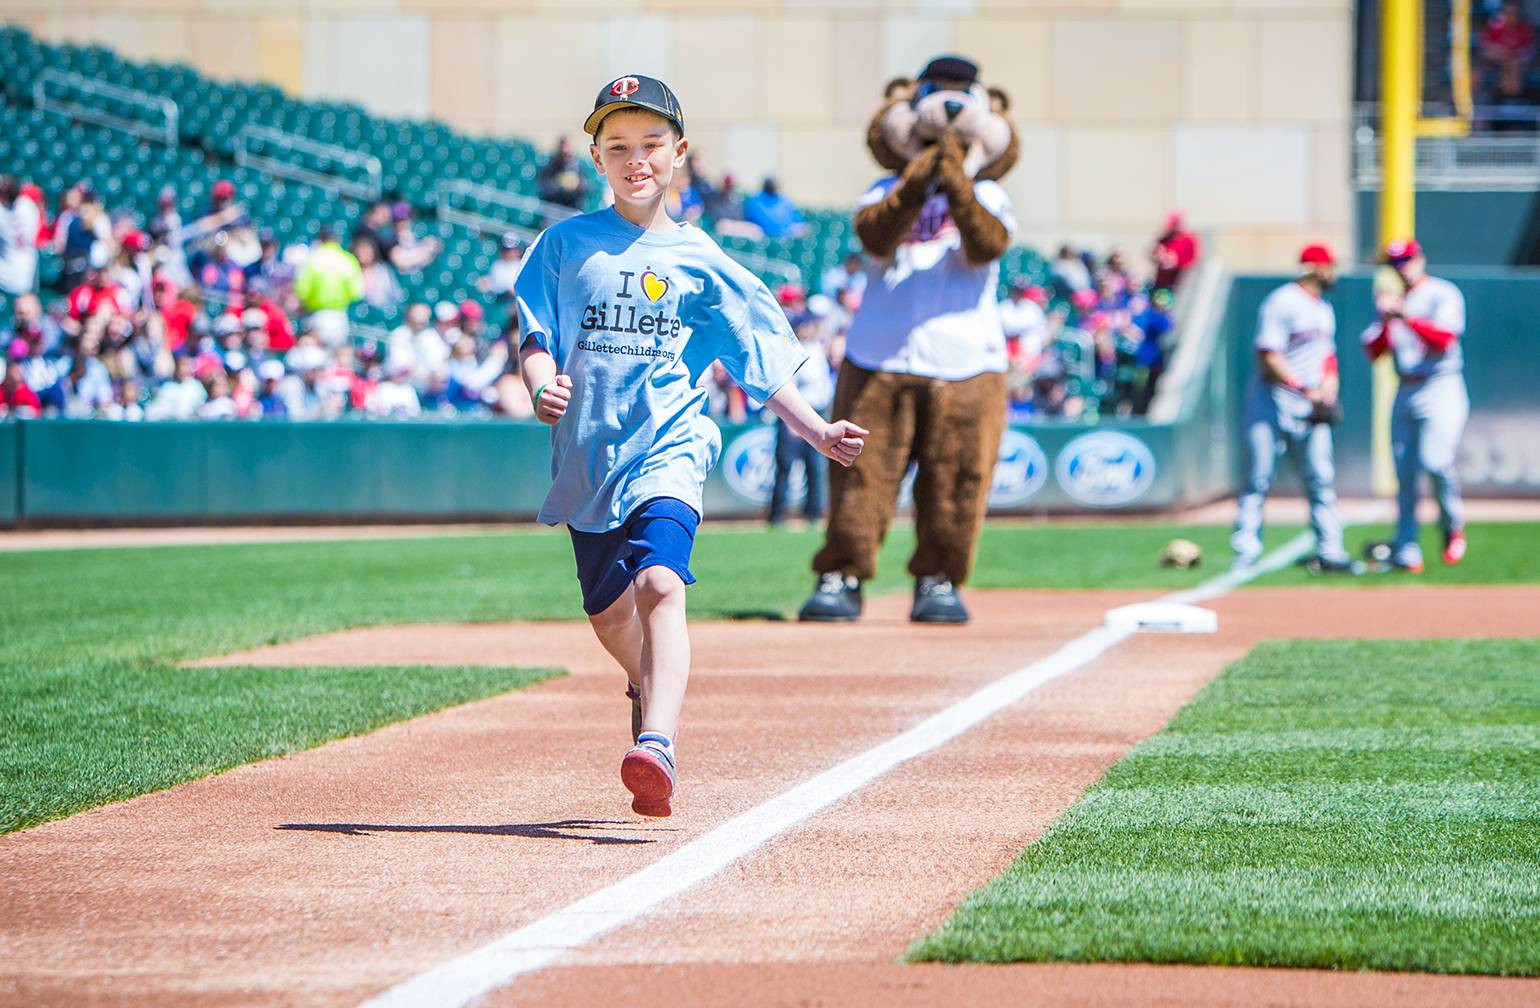 Gillette patient Wyatt runs the bases at Twins game